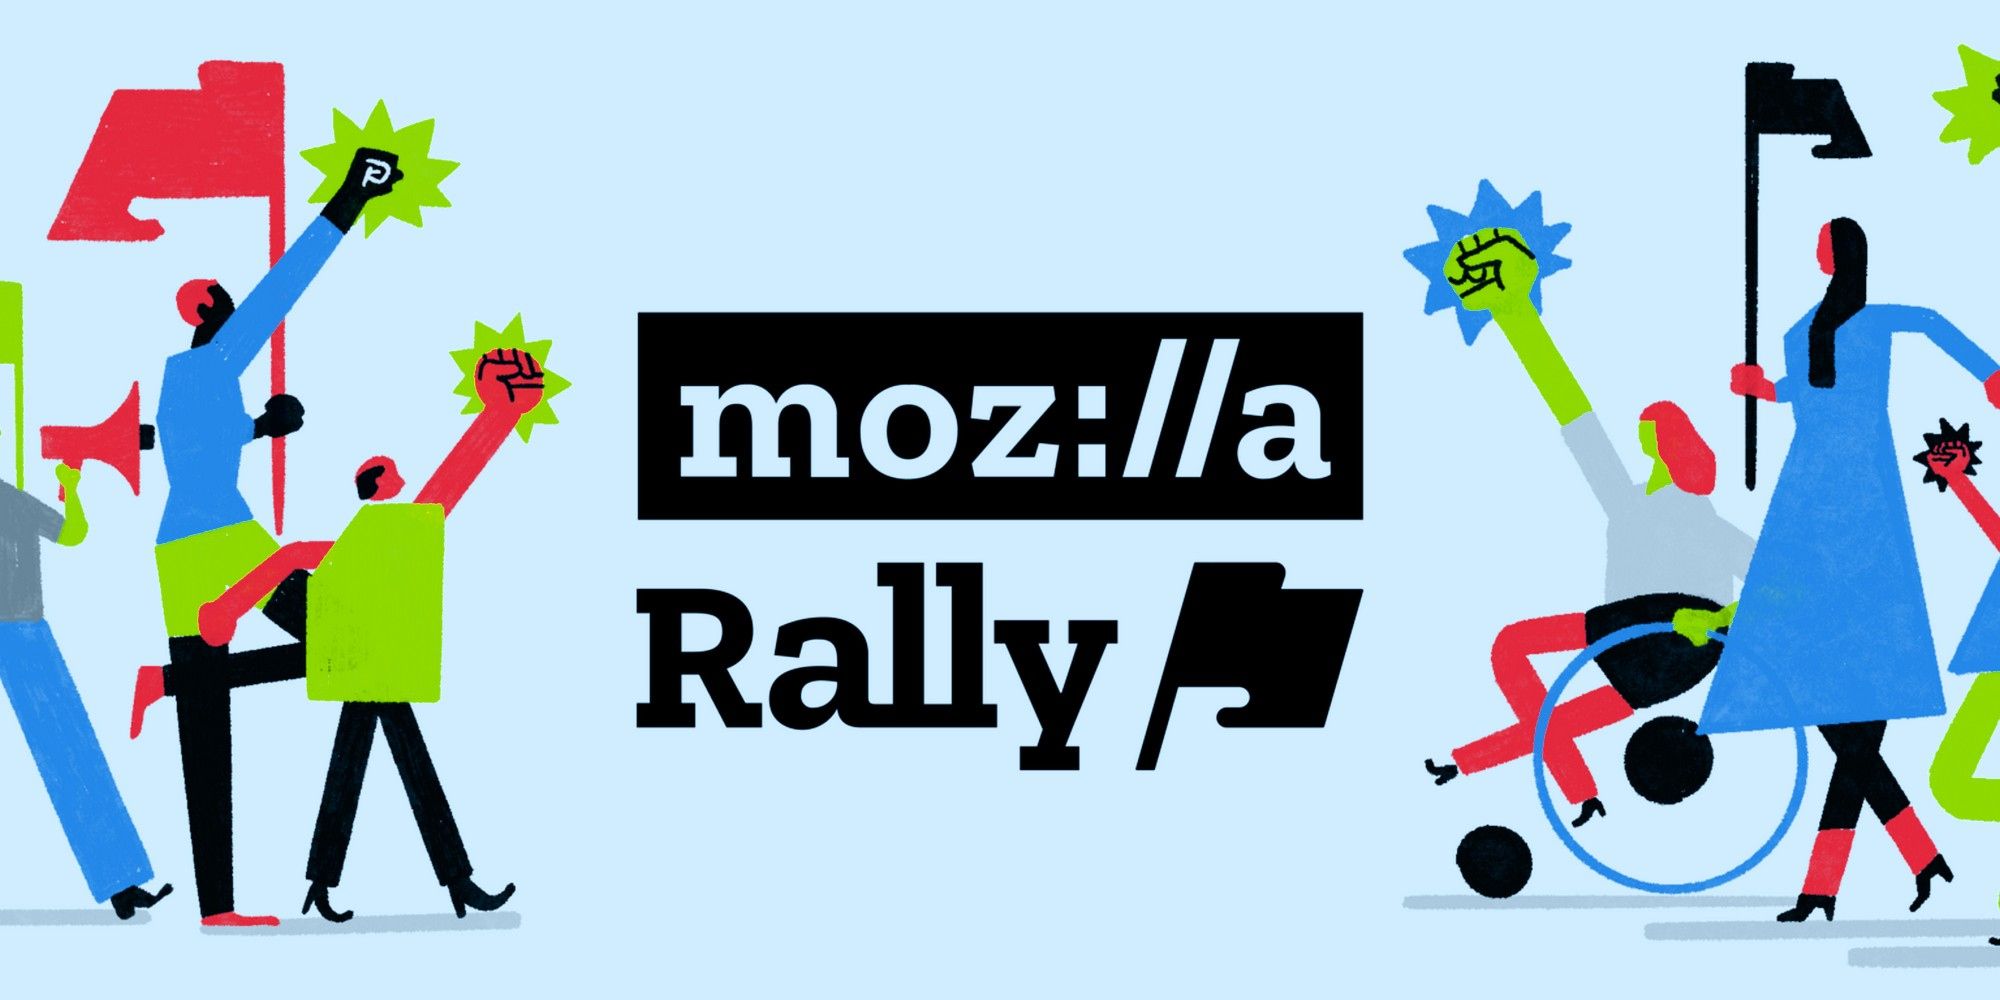 Mozilla Rally Facebook project